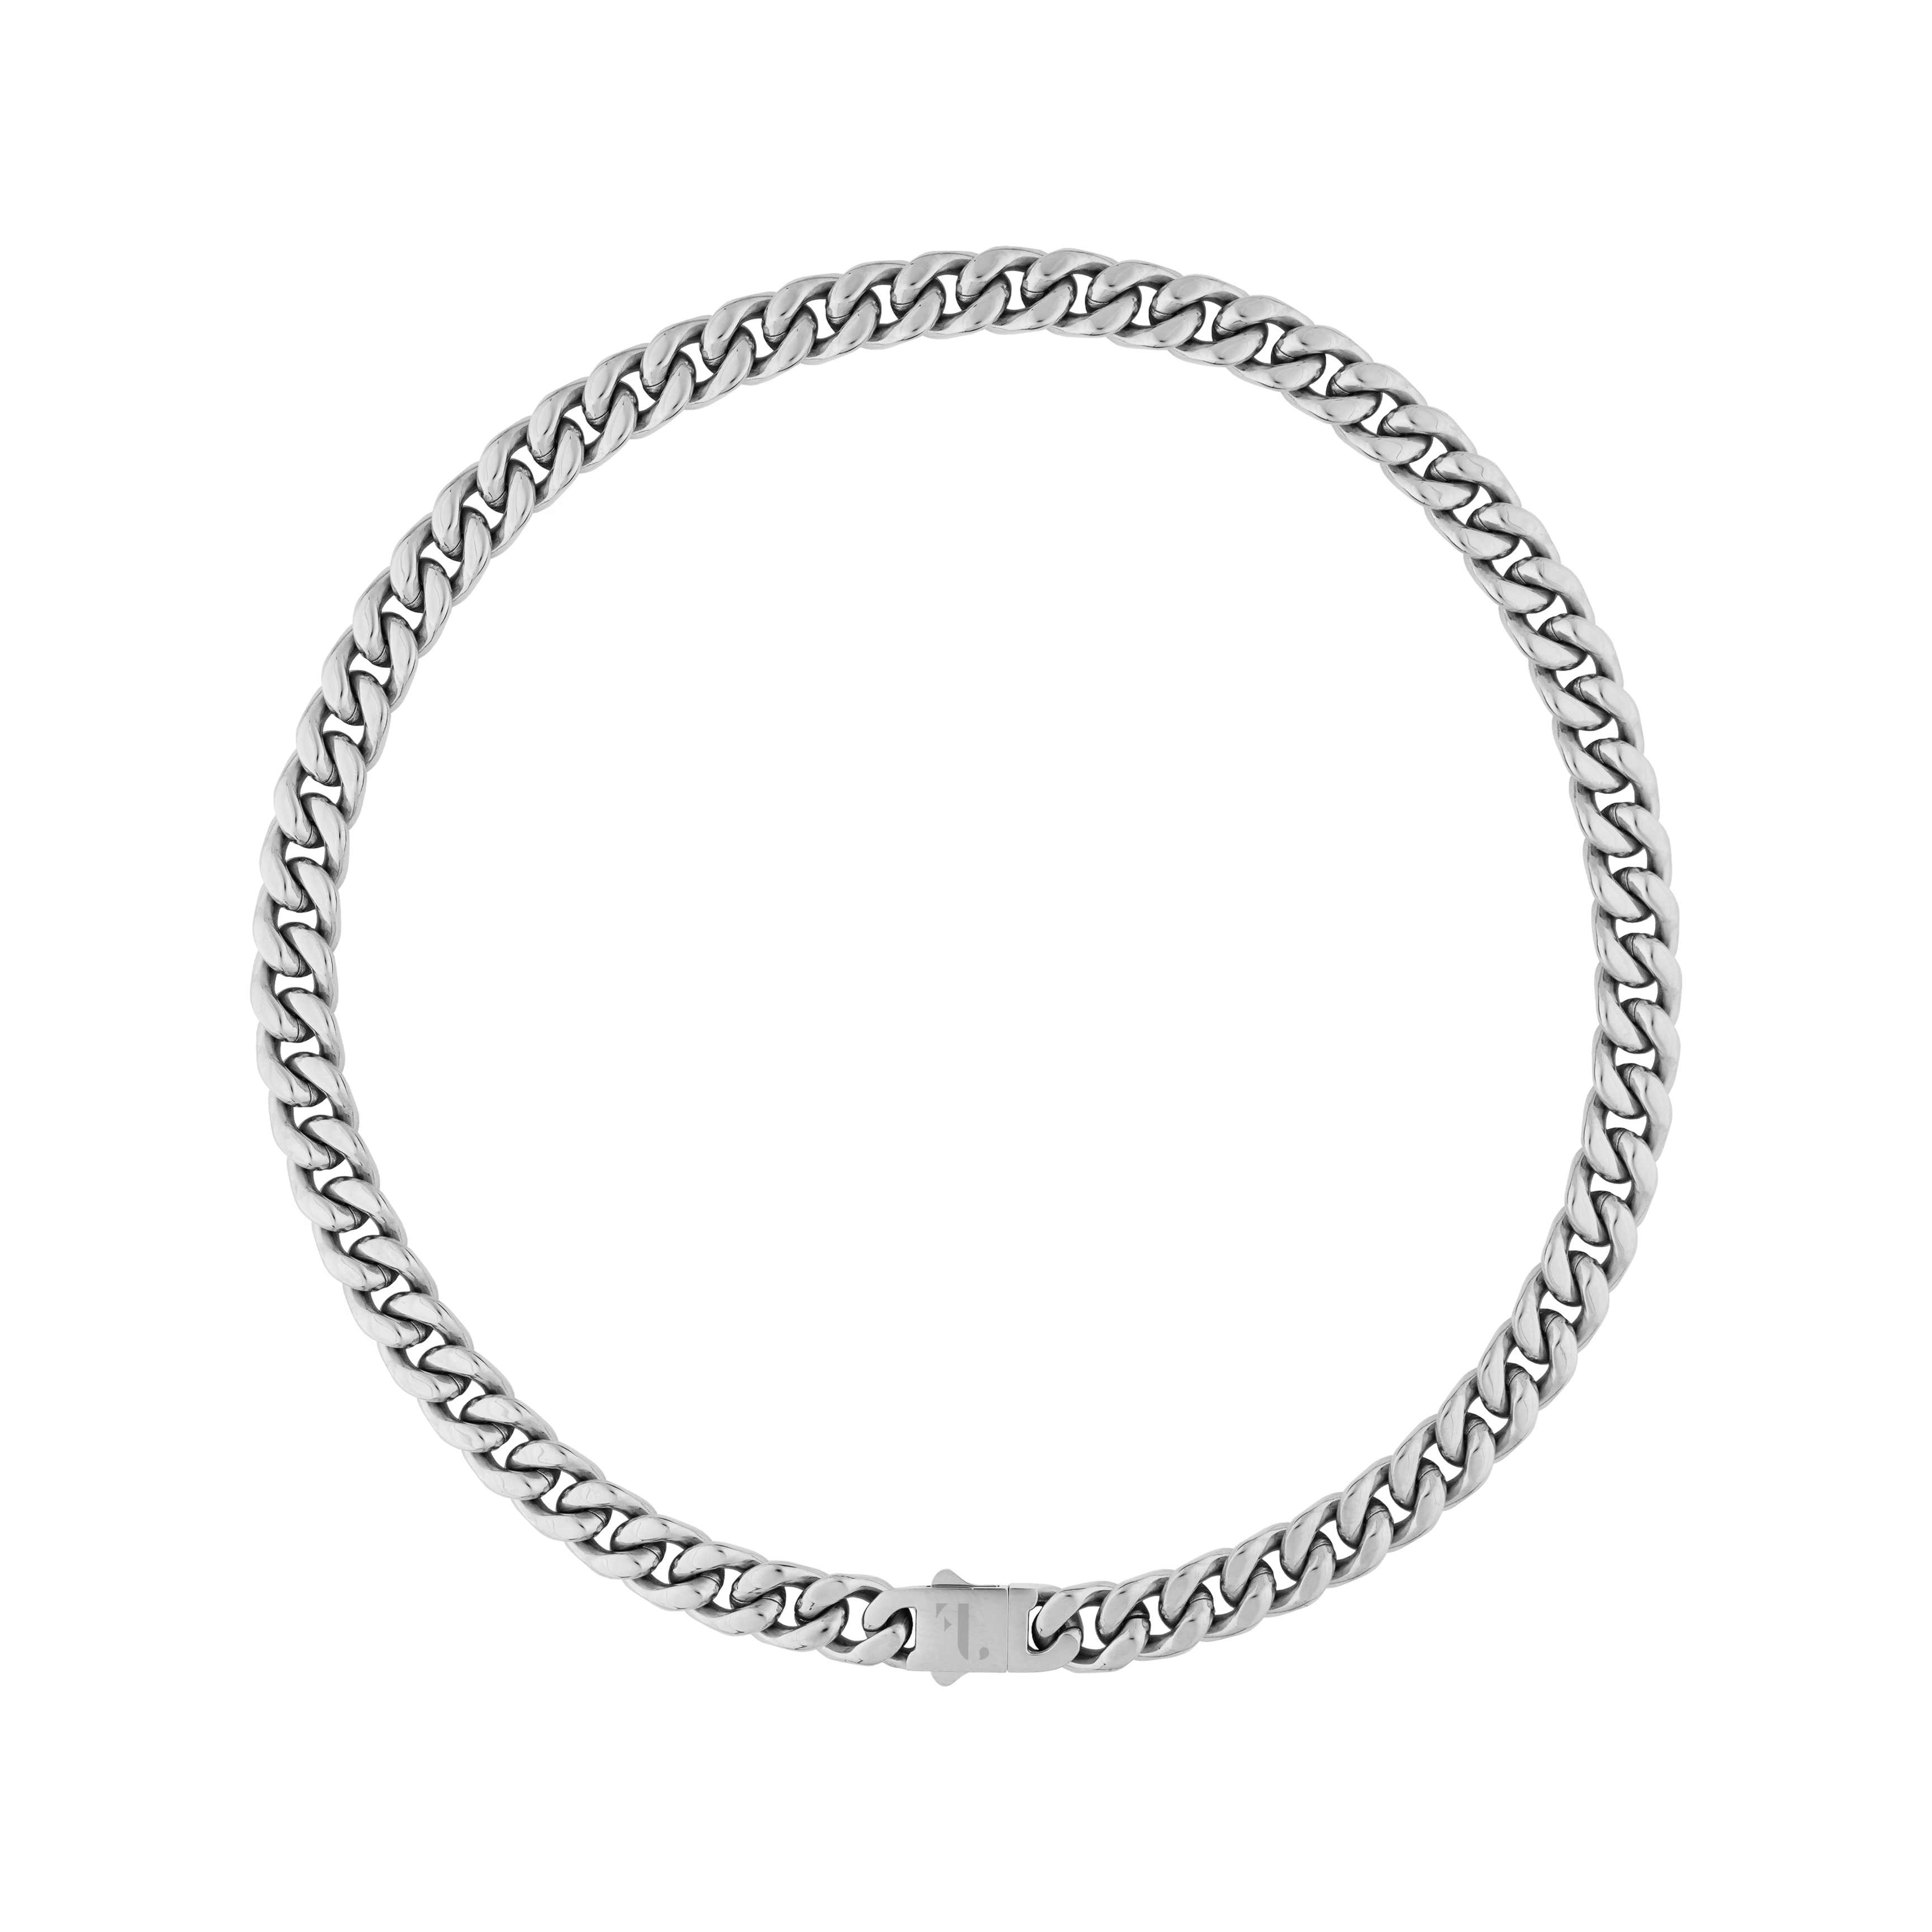 Cass women's necklace by Five Jwlry, designed with a 10mm tightly woven Cuban link chain in a silver hue, crafted from water-resistant 316L stainless steel. Available in sizes 40cm, 45cm and 50cm. Hypoallergenic and accompanied by a 2-year warranty.